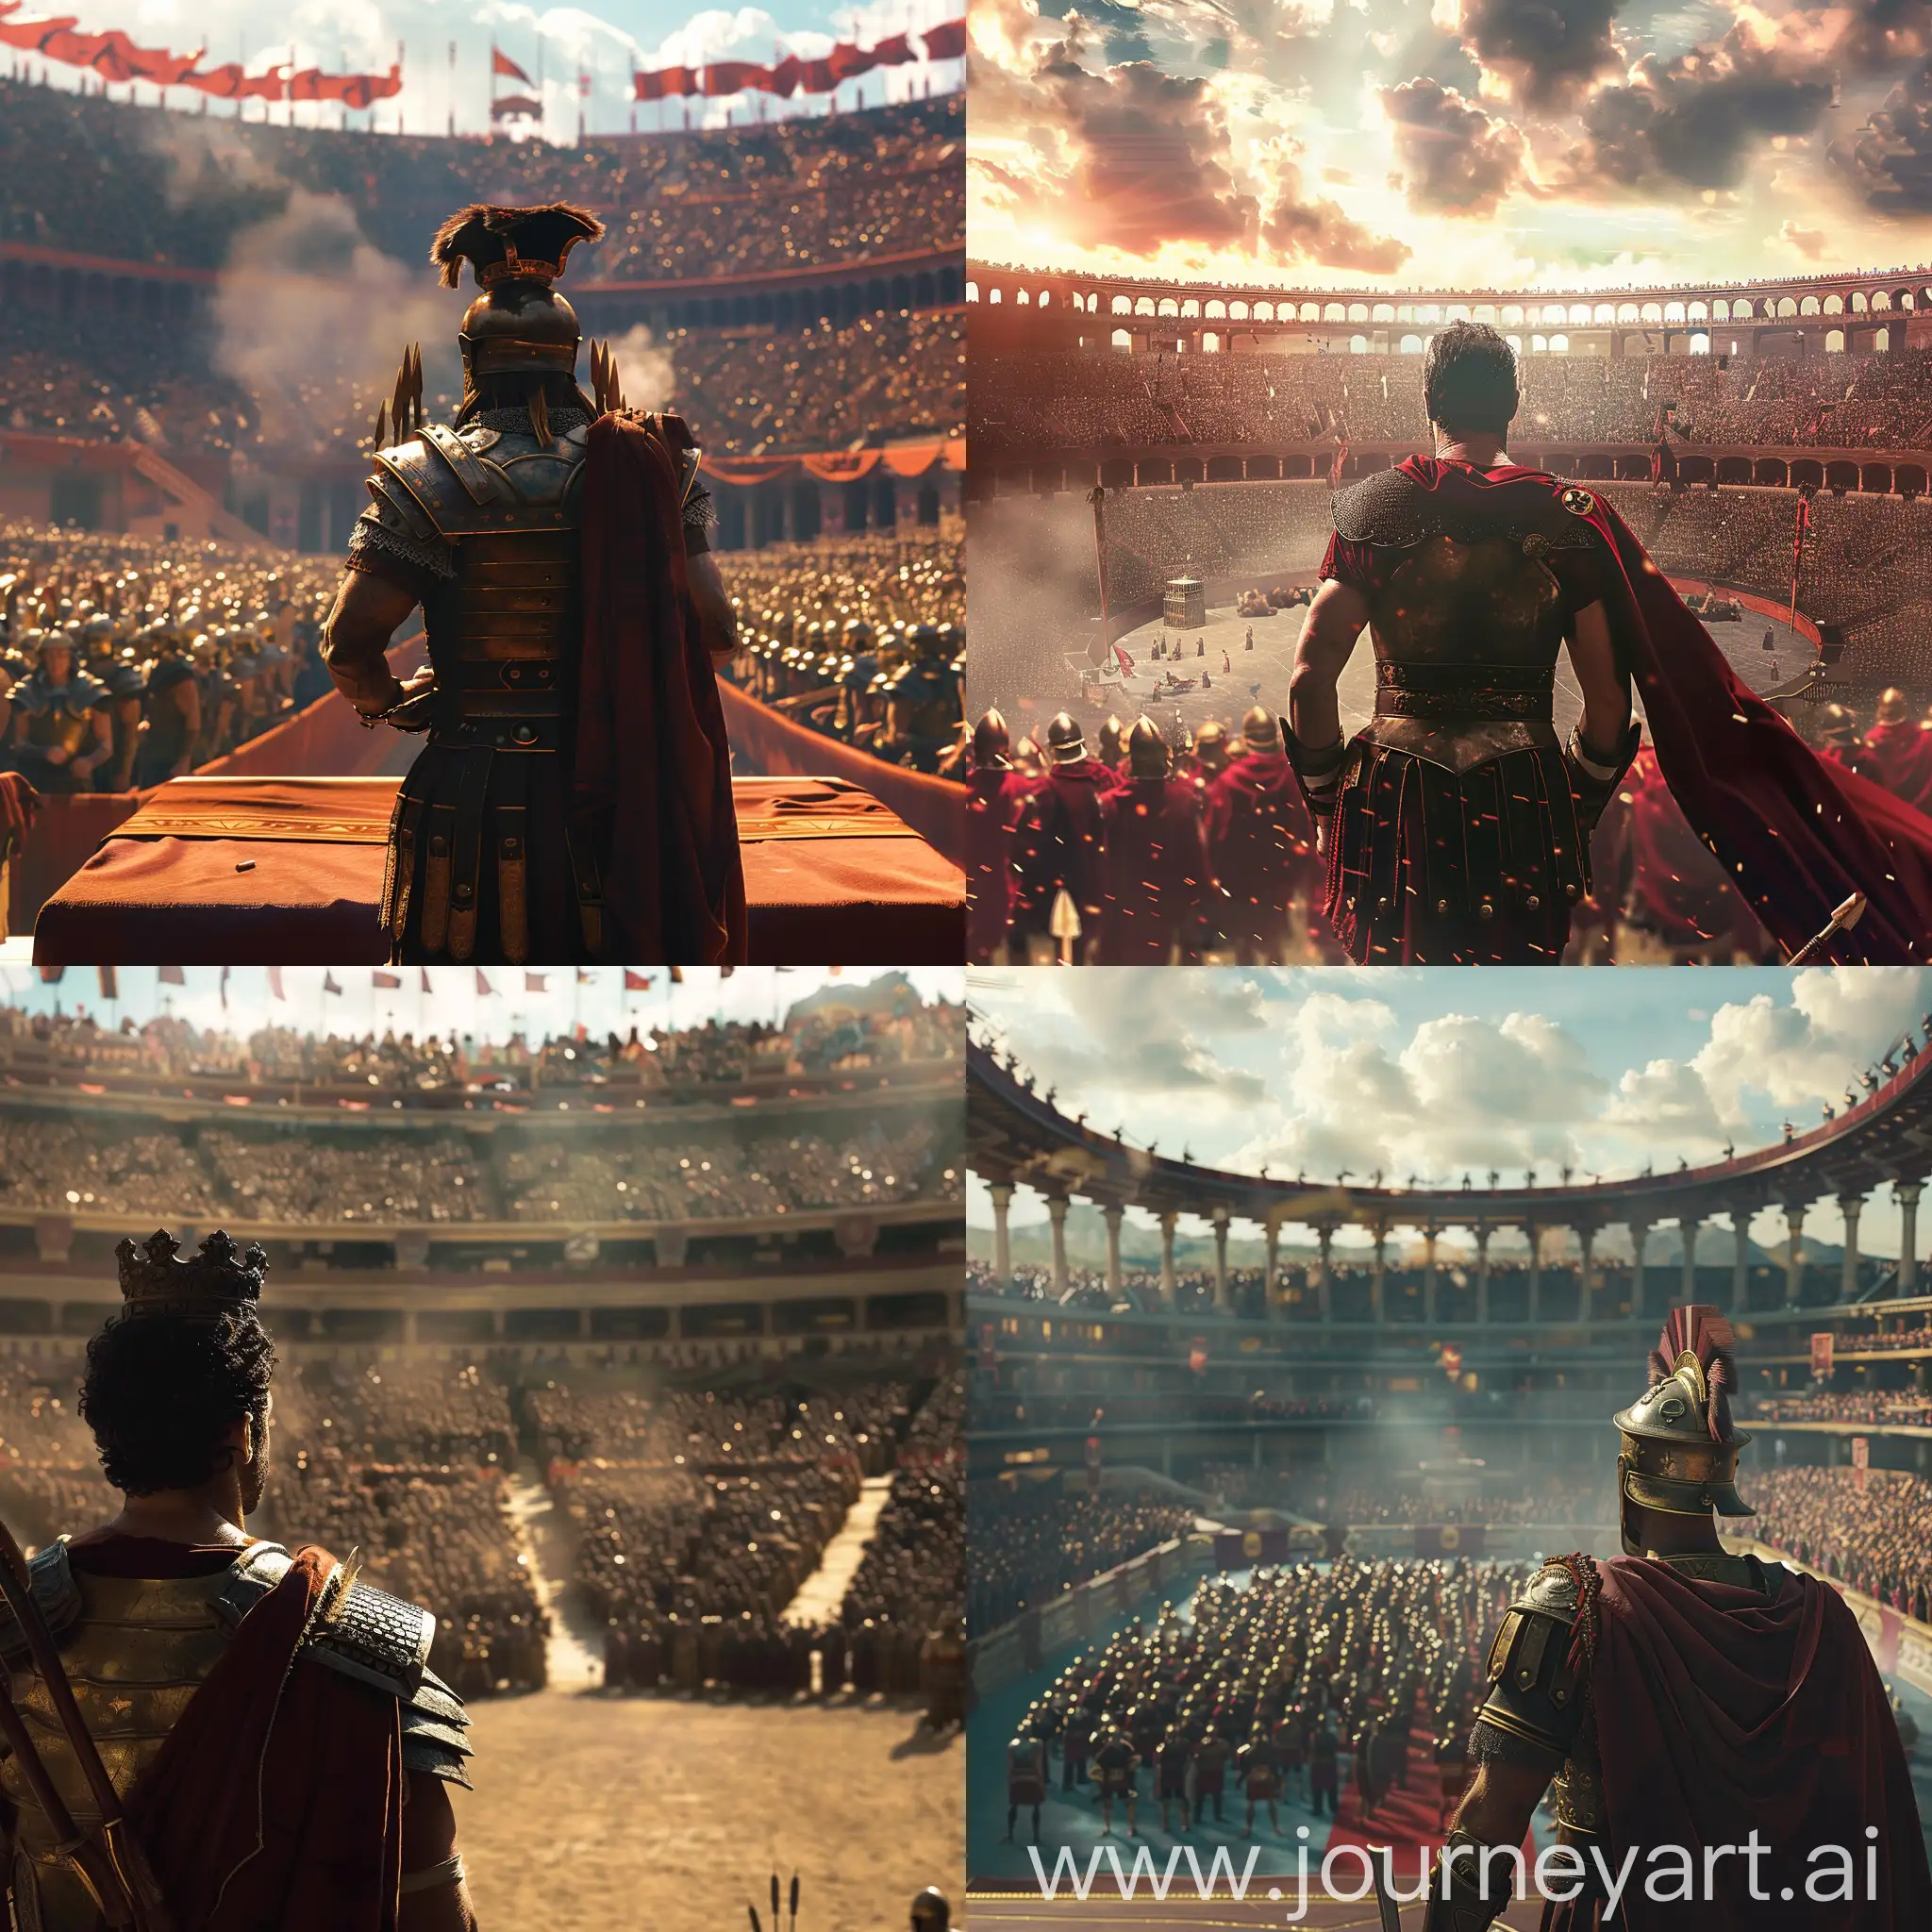 Epic-Crowning-Ceremony-of-the-Future-King-in-a-Packed-Stadium